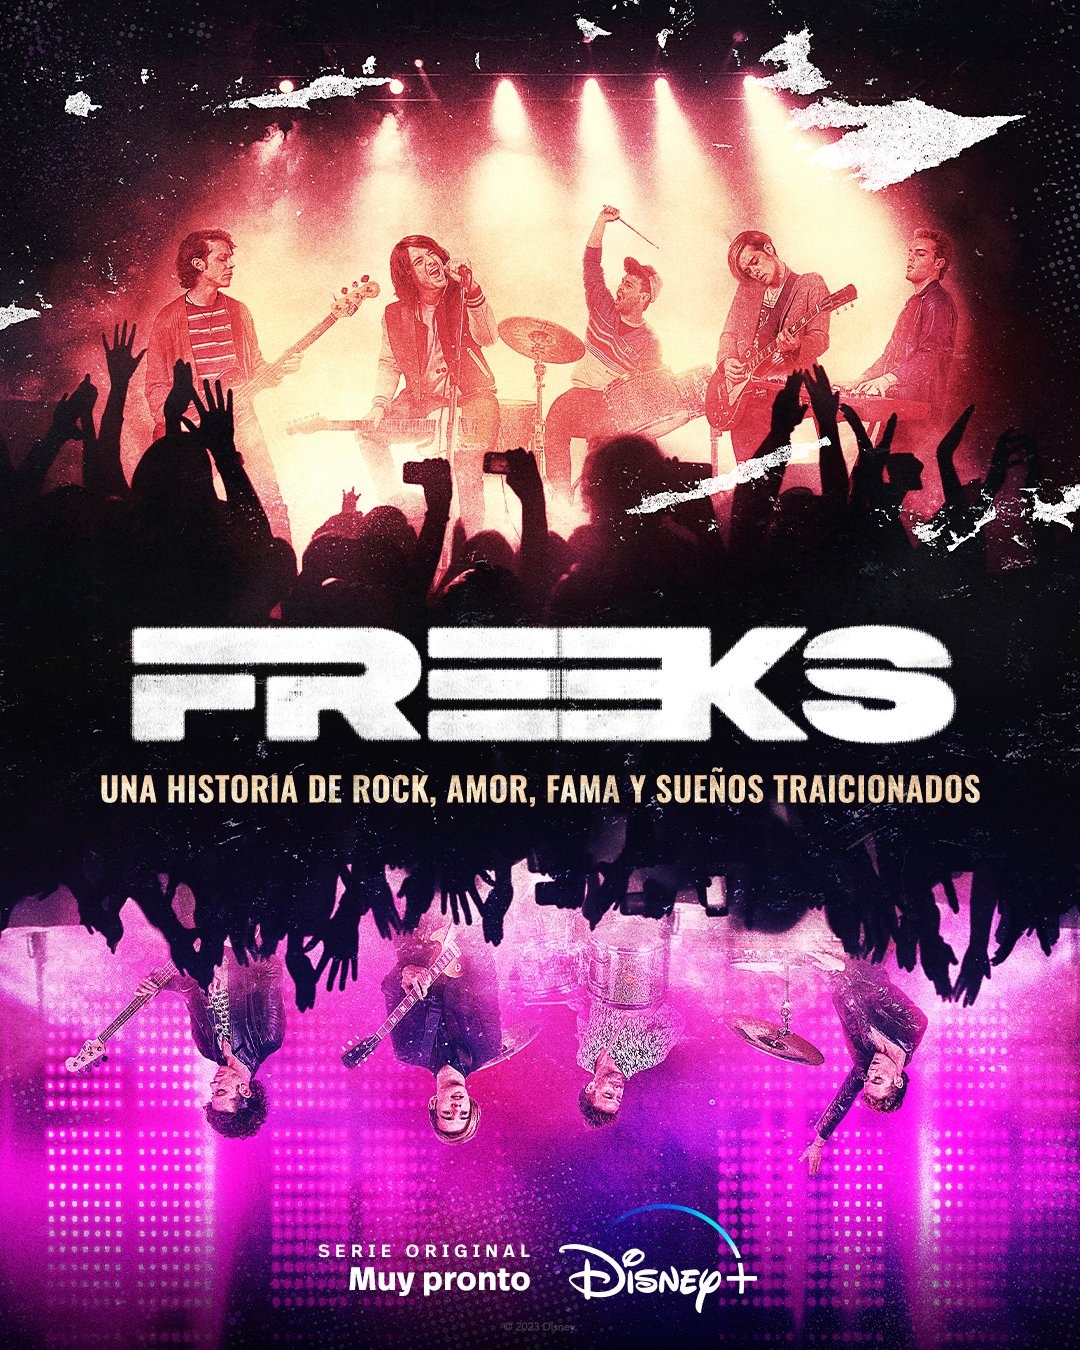 Extra Large TV Poster Image for FreeKs (#1 of 2)